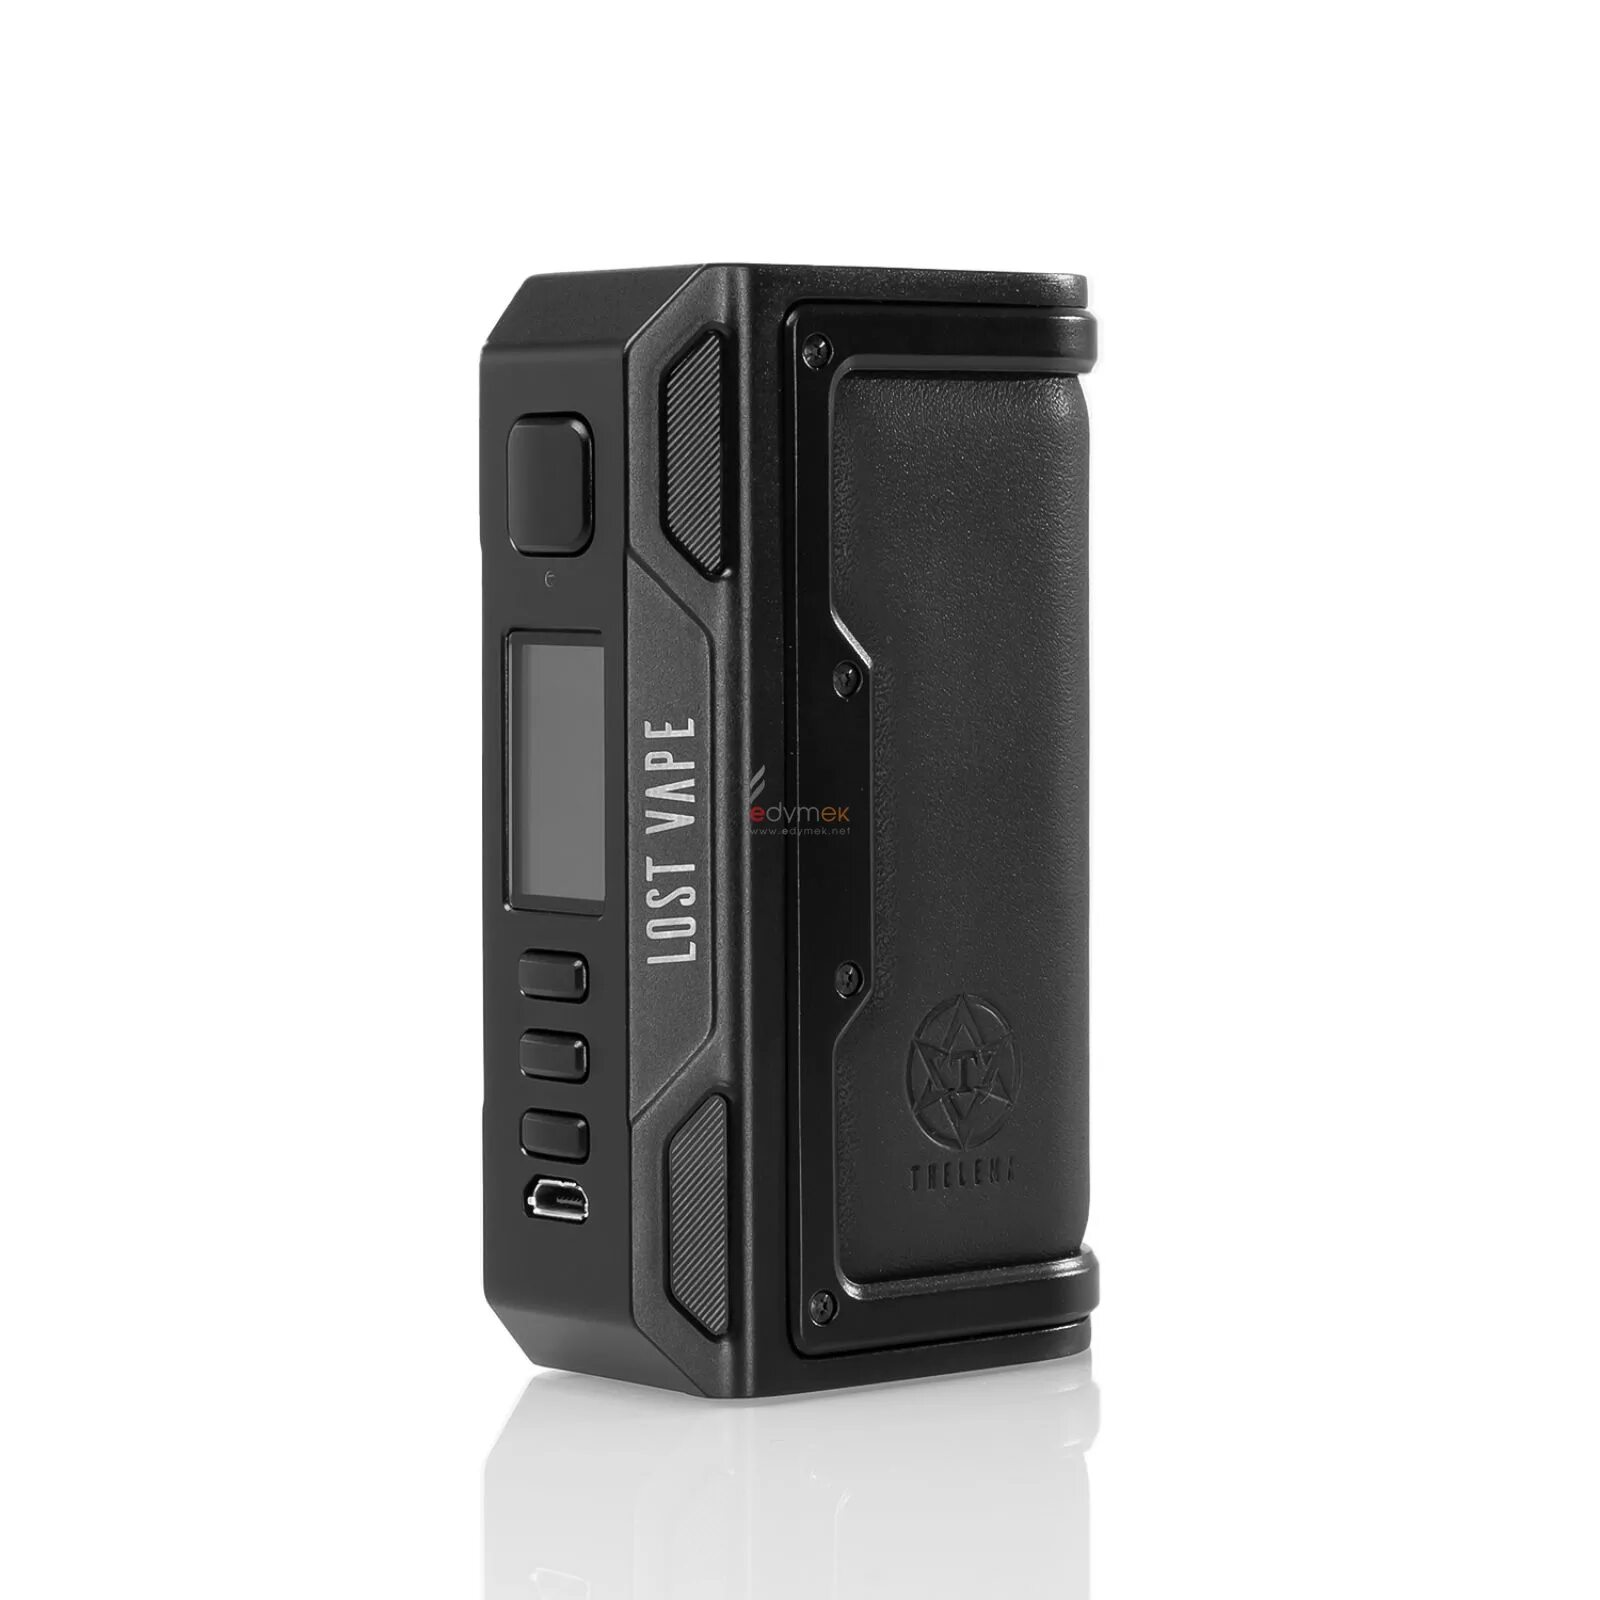 Lost Vape Thelema dna250c. Lost Vape Thelema dna250c набор. Lost Vape Thelema dna250c Box Mod. Бокс мод Lost Vape Thelema Quest 200w.